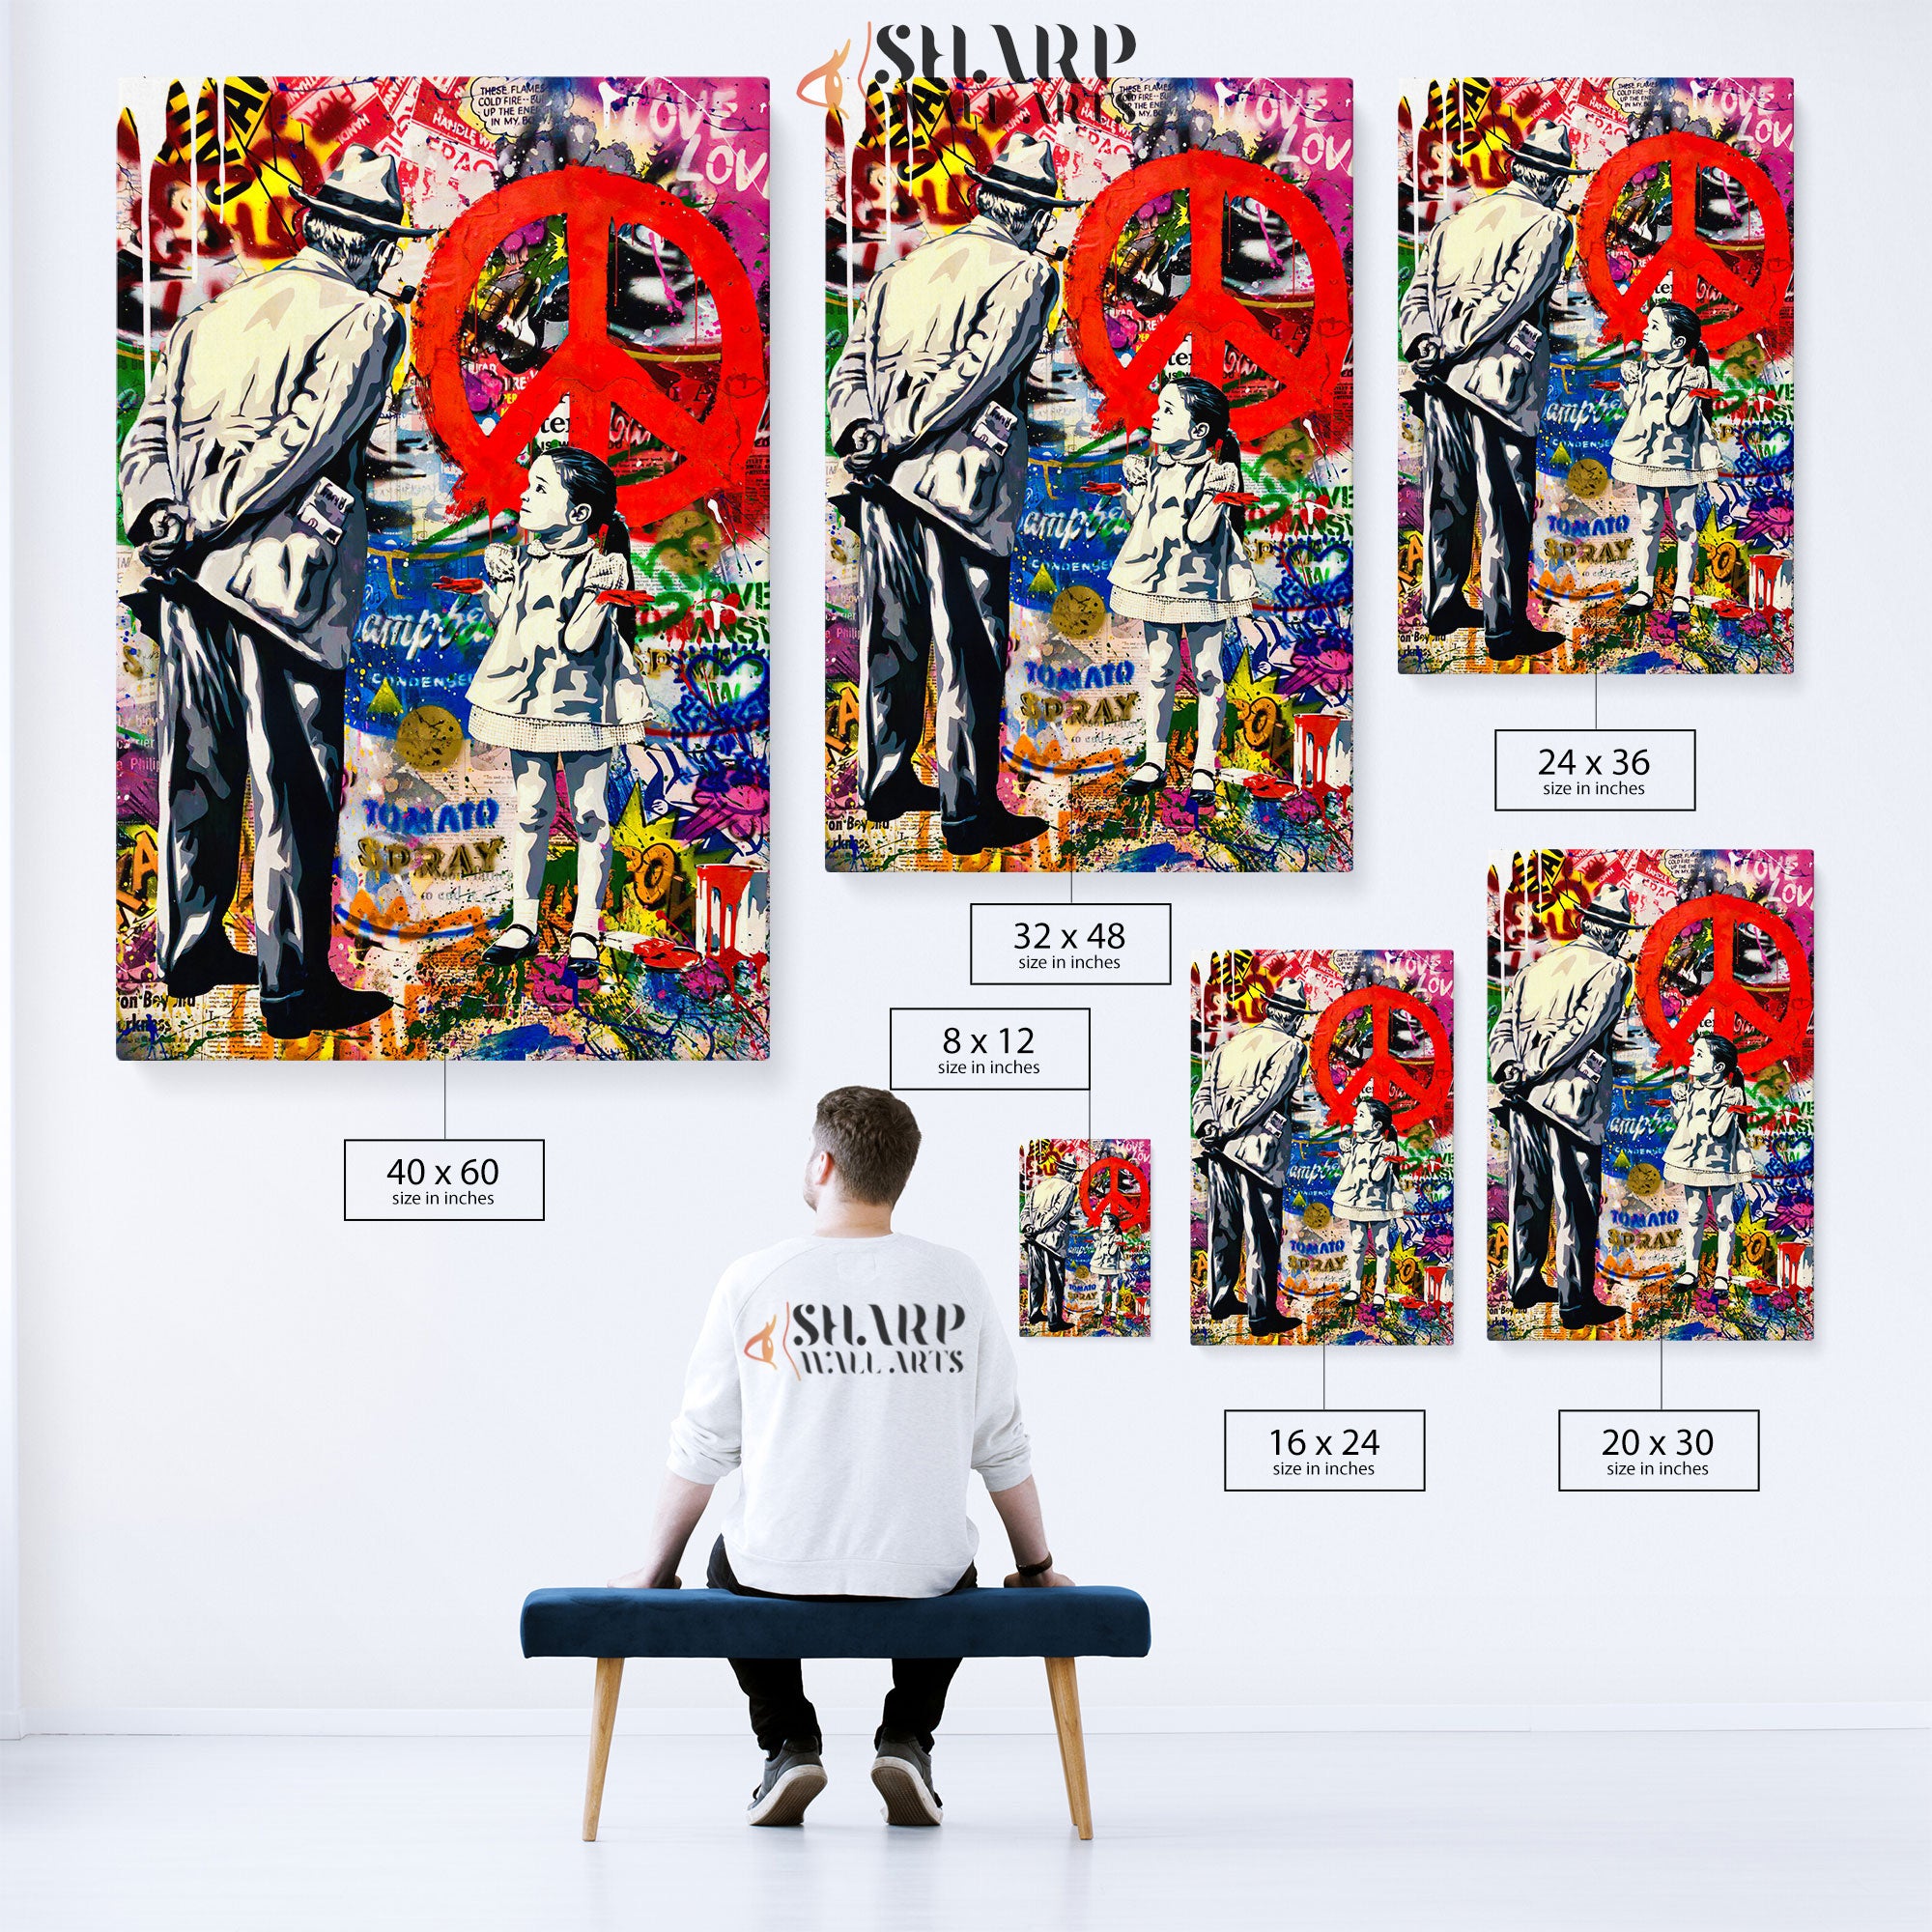 Caught Red Handed Peace Canvas Wall Art